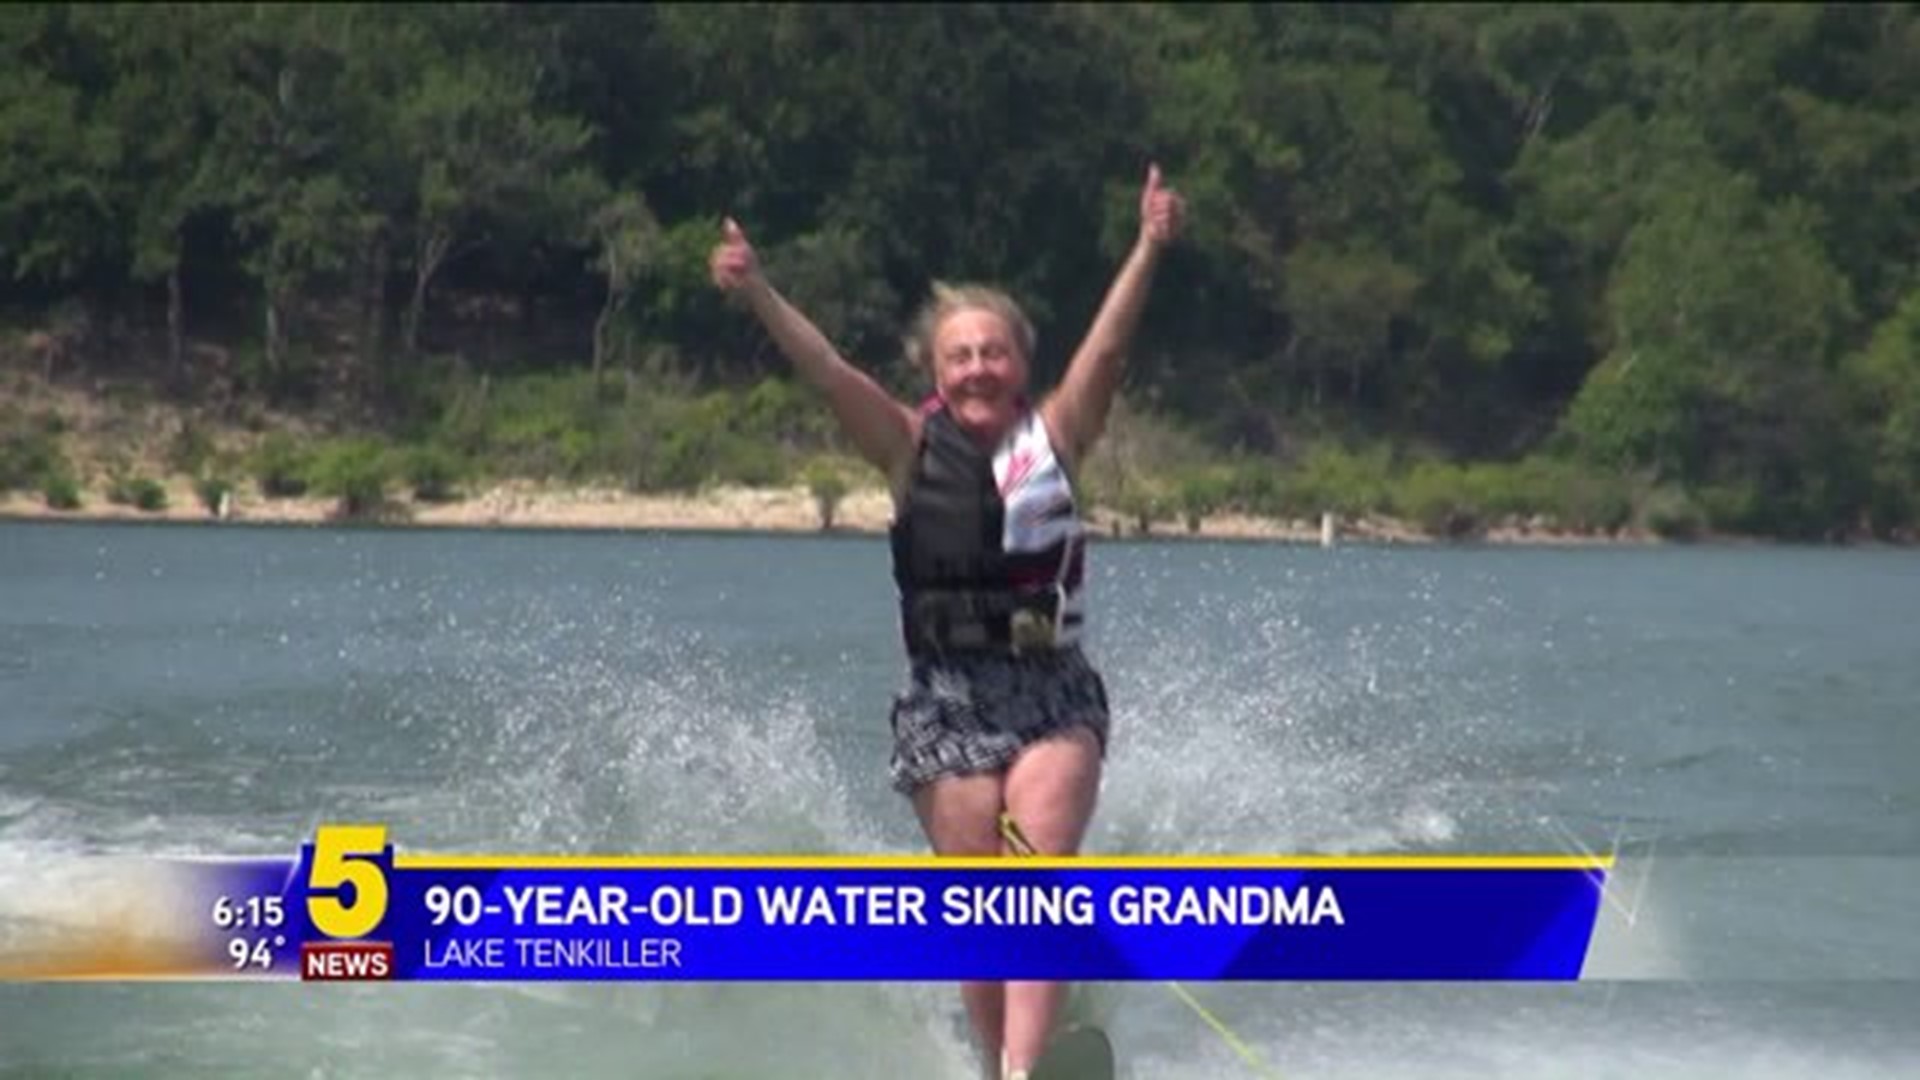 90-Year-Old Water Skiing Granny